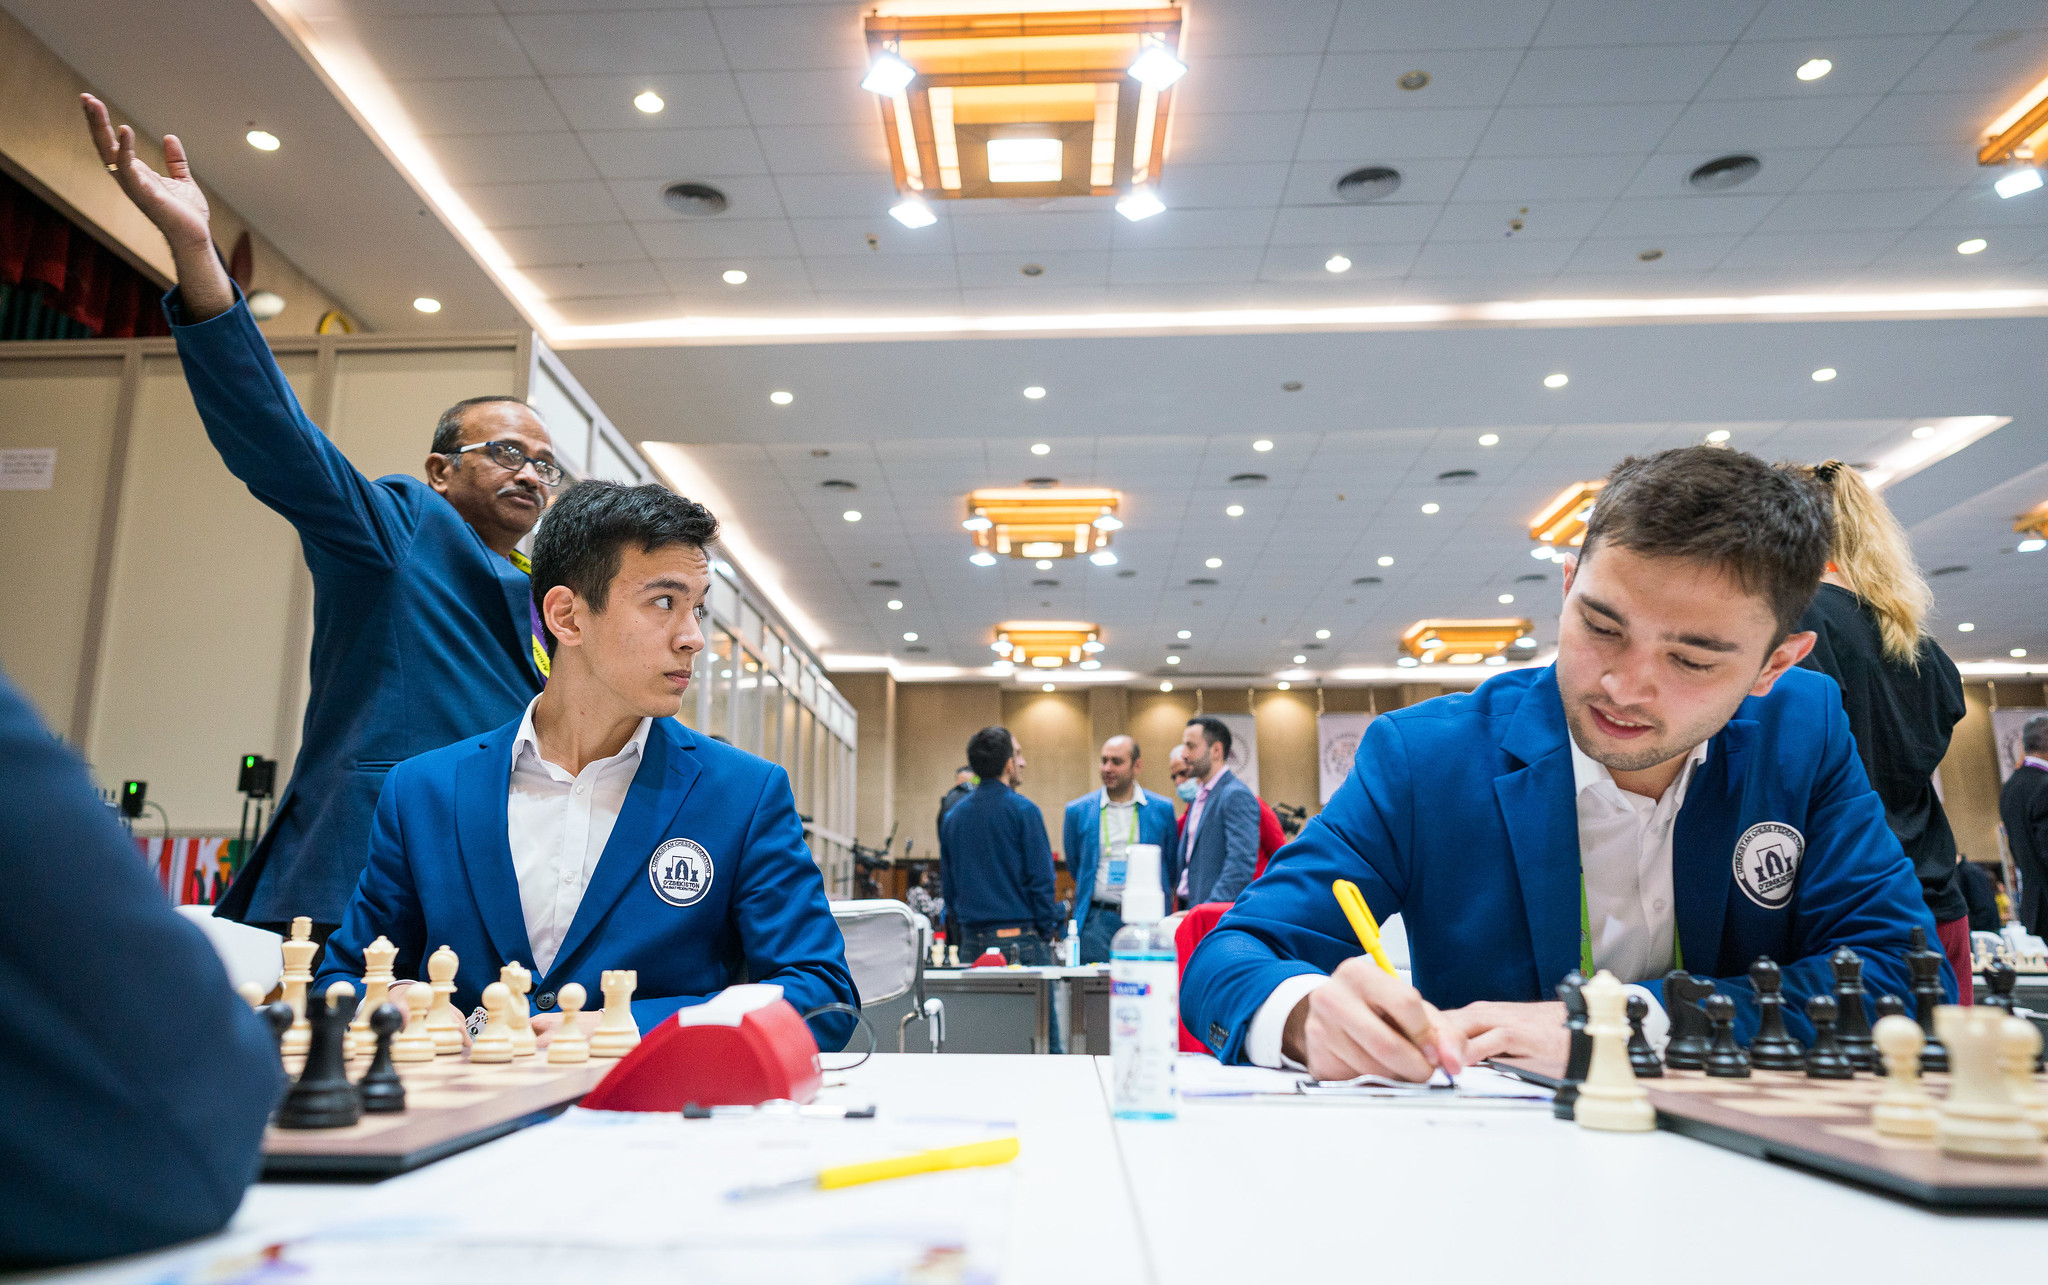 Uzbekistan will host the Chess Olympiad 2026. ~ CURRENT AFFAIRS